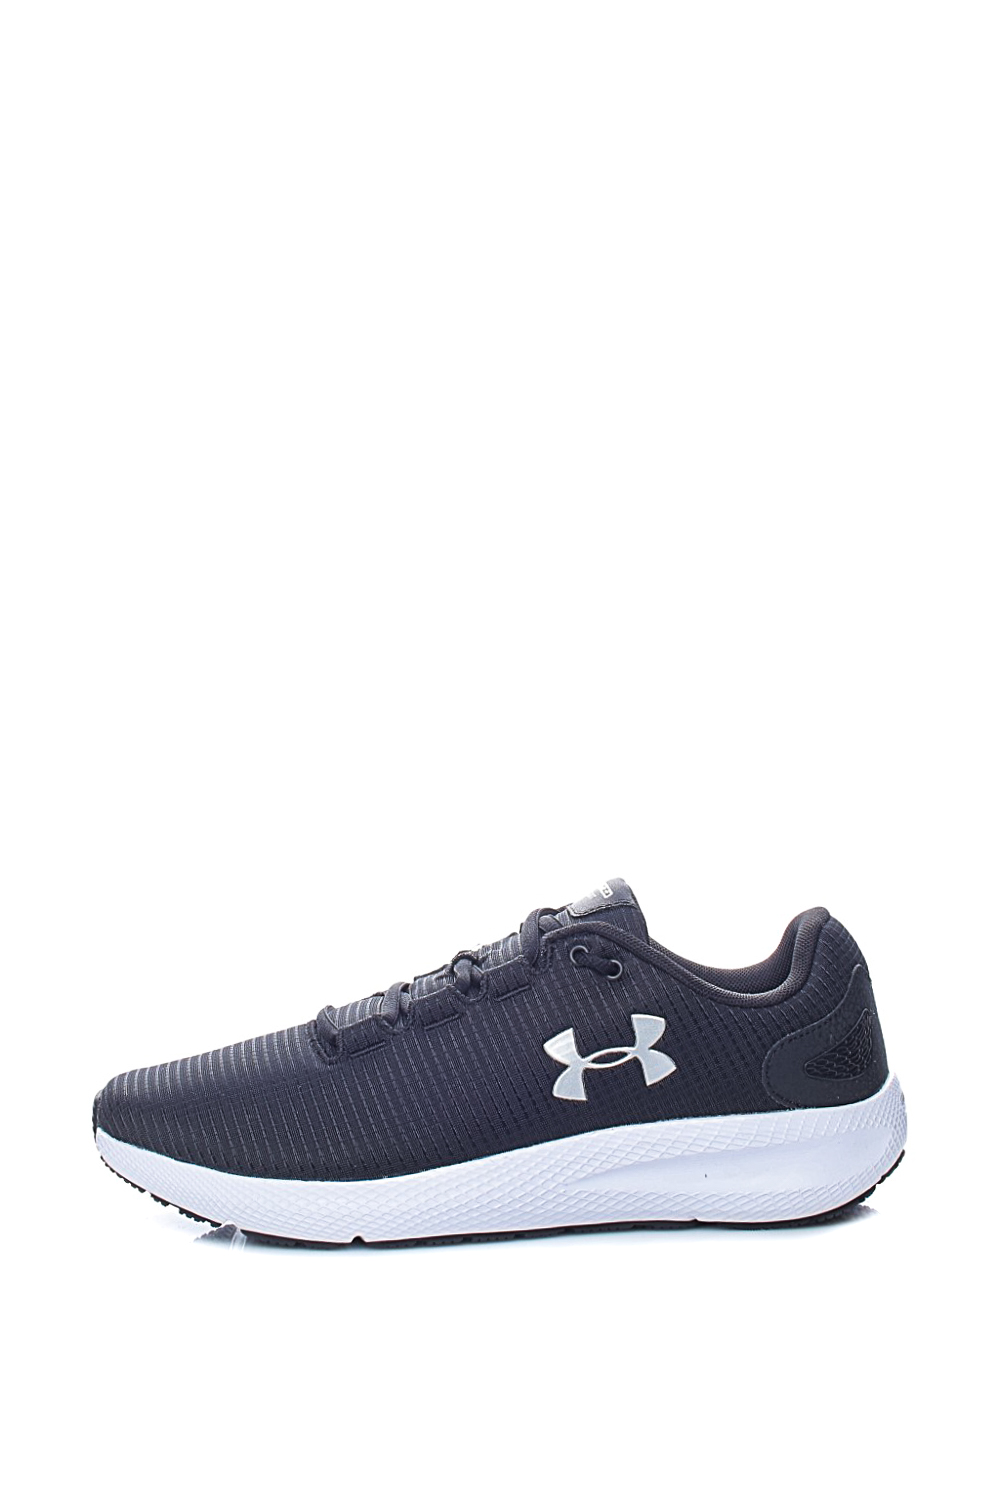 UNDER ARMOUR – Ανδρικα παπουτσια running UNDER ARMOUR Charged Pursuit 2 Rip μαυρα